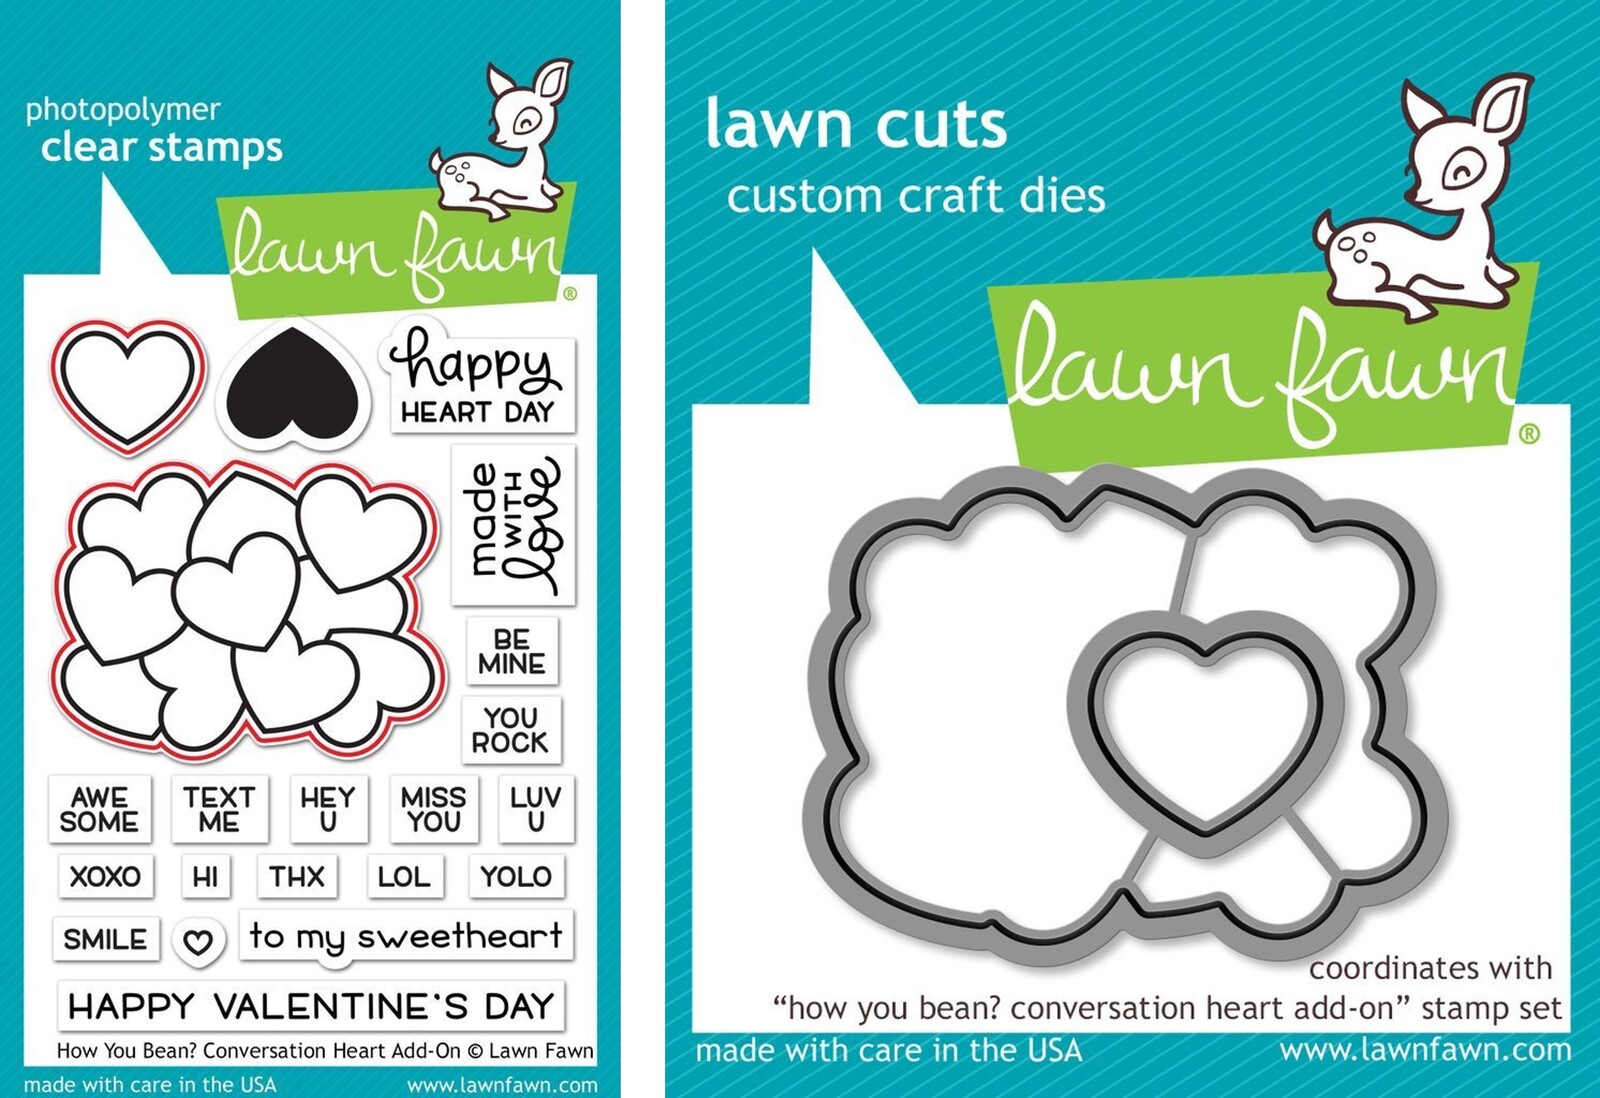 Lawn Fawn how you bean? conversation heart add-on Stamp+Die Bundle